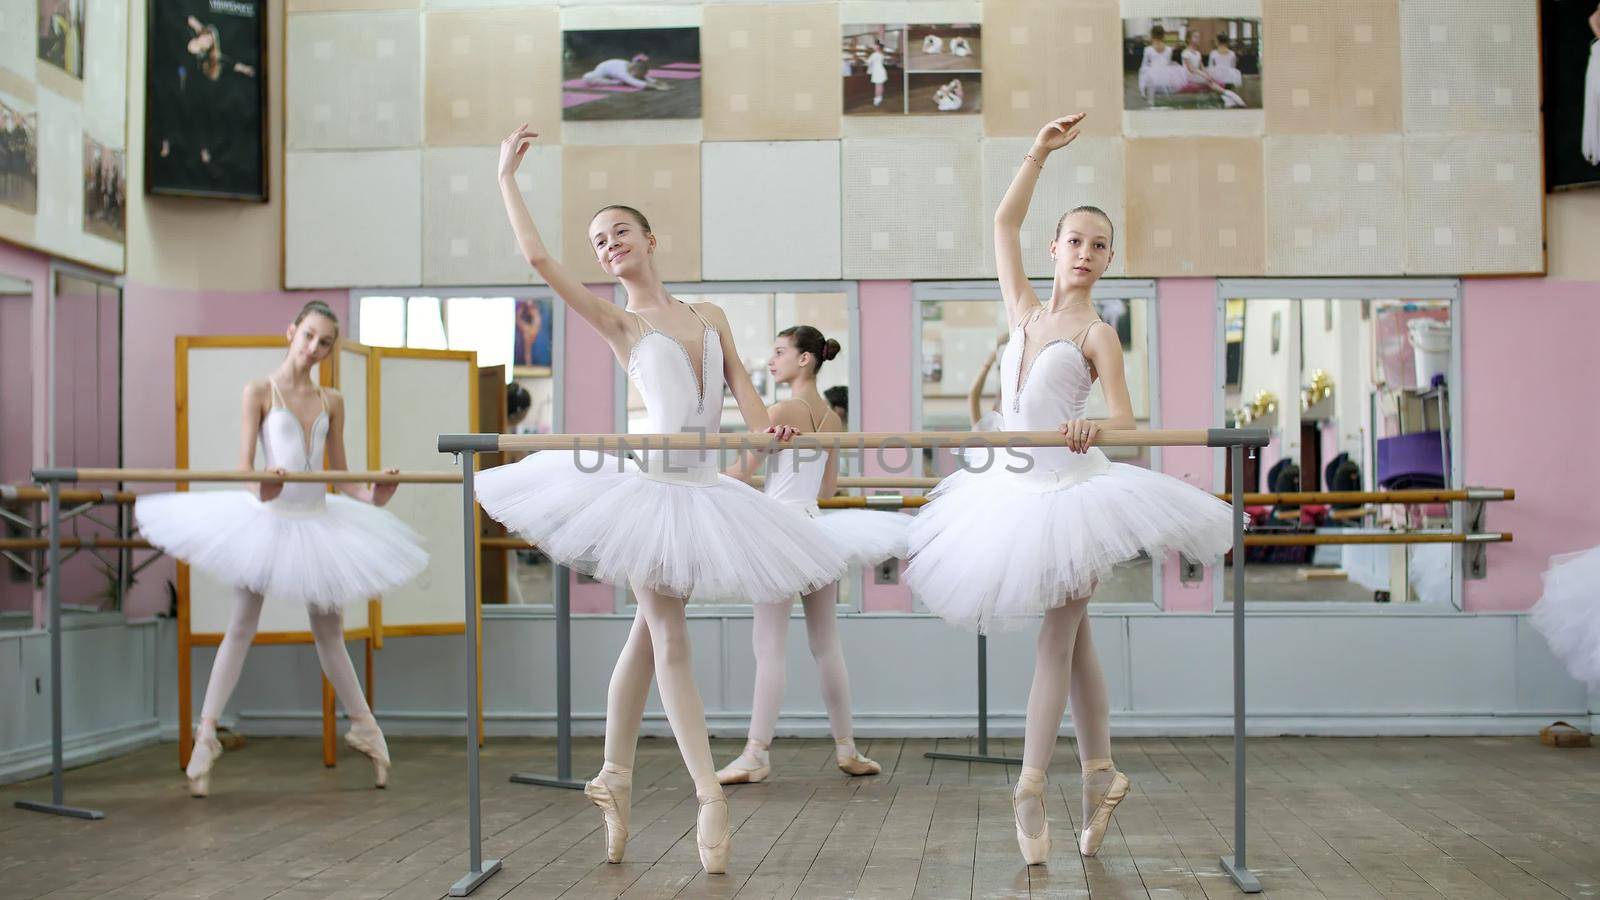 in the ballet hall, girls in white ballet tutus, packs are engaged at ballet, rehearse croise forward, Young ballerinas standing on toes in pointe shoes at railing in ballet hall. by djtreneryay